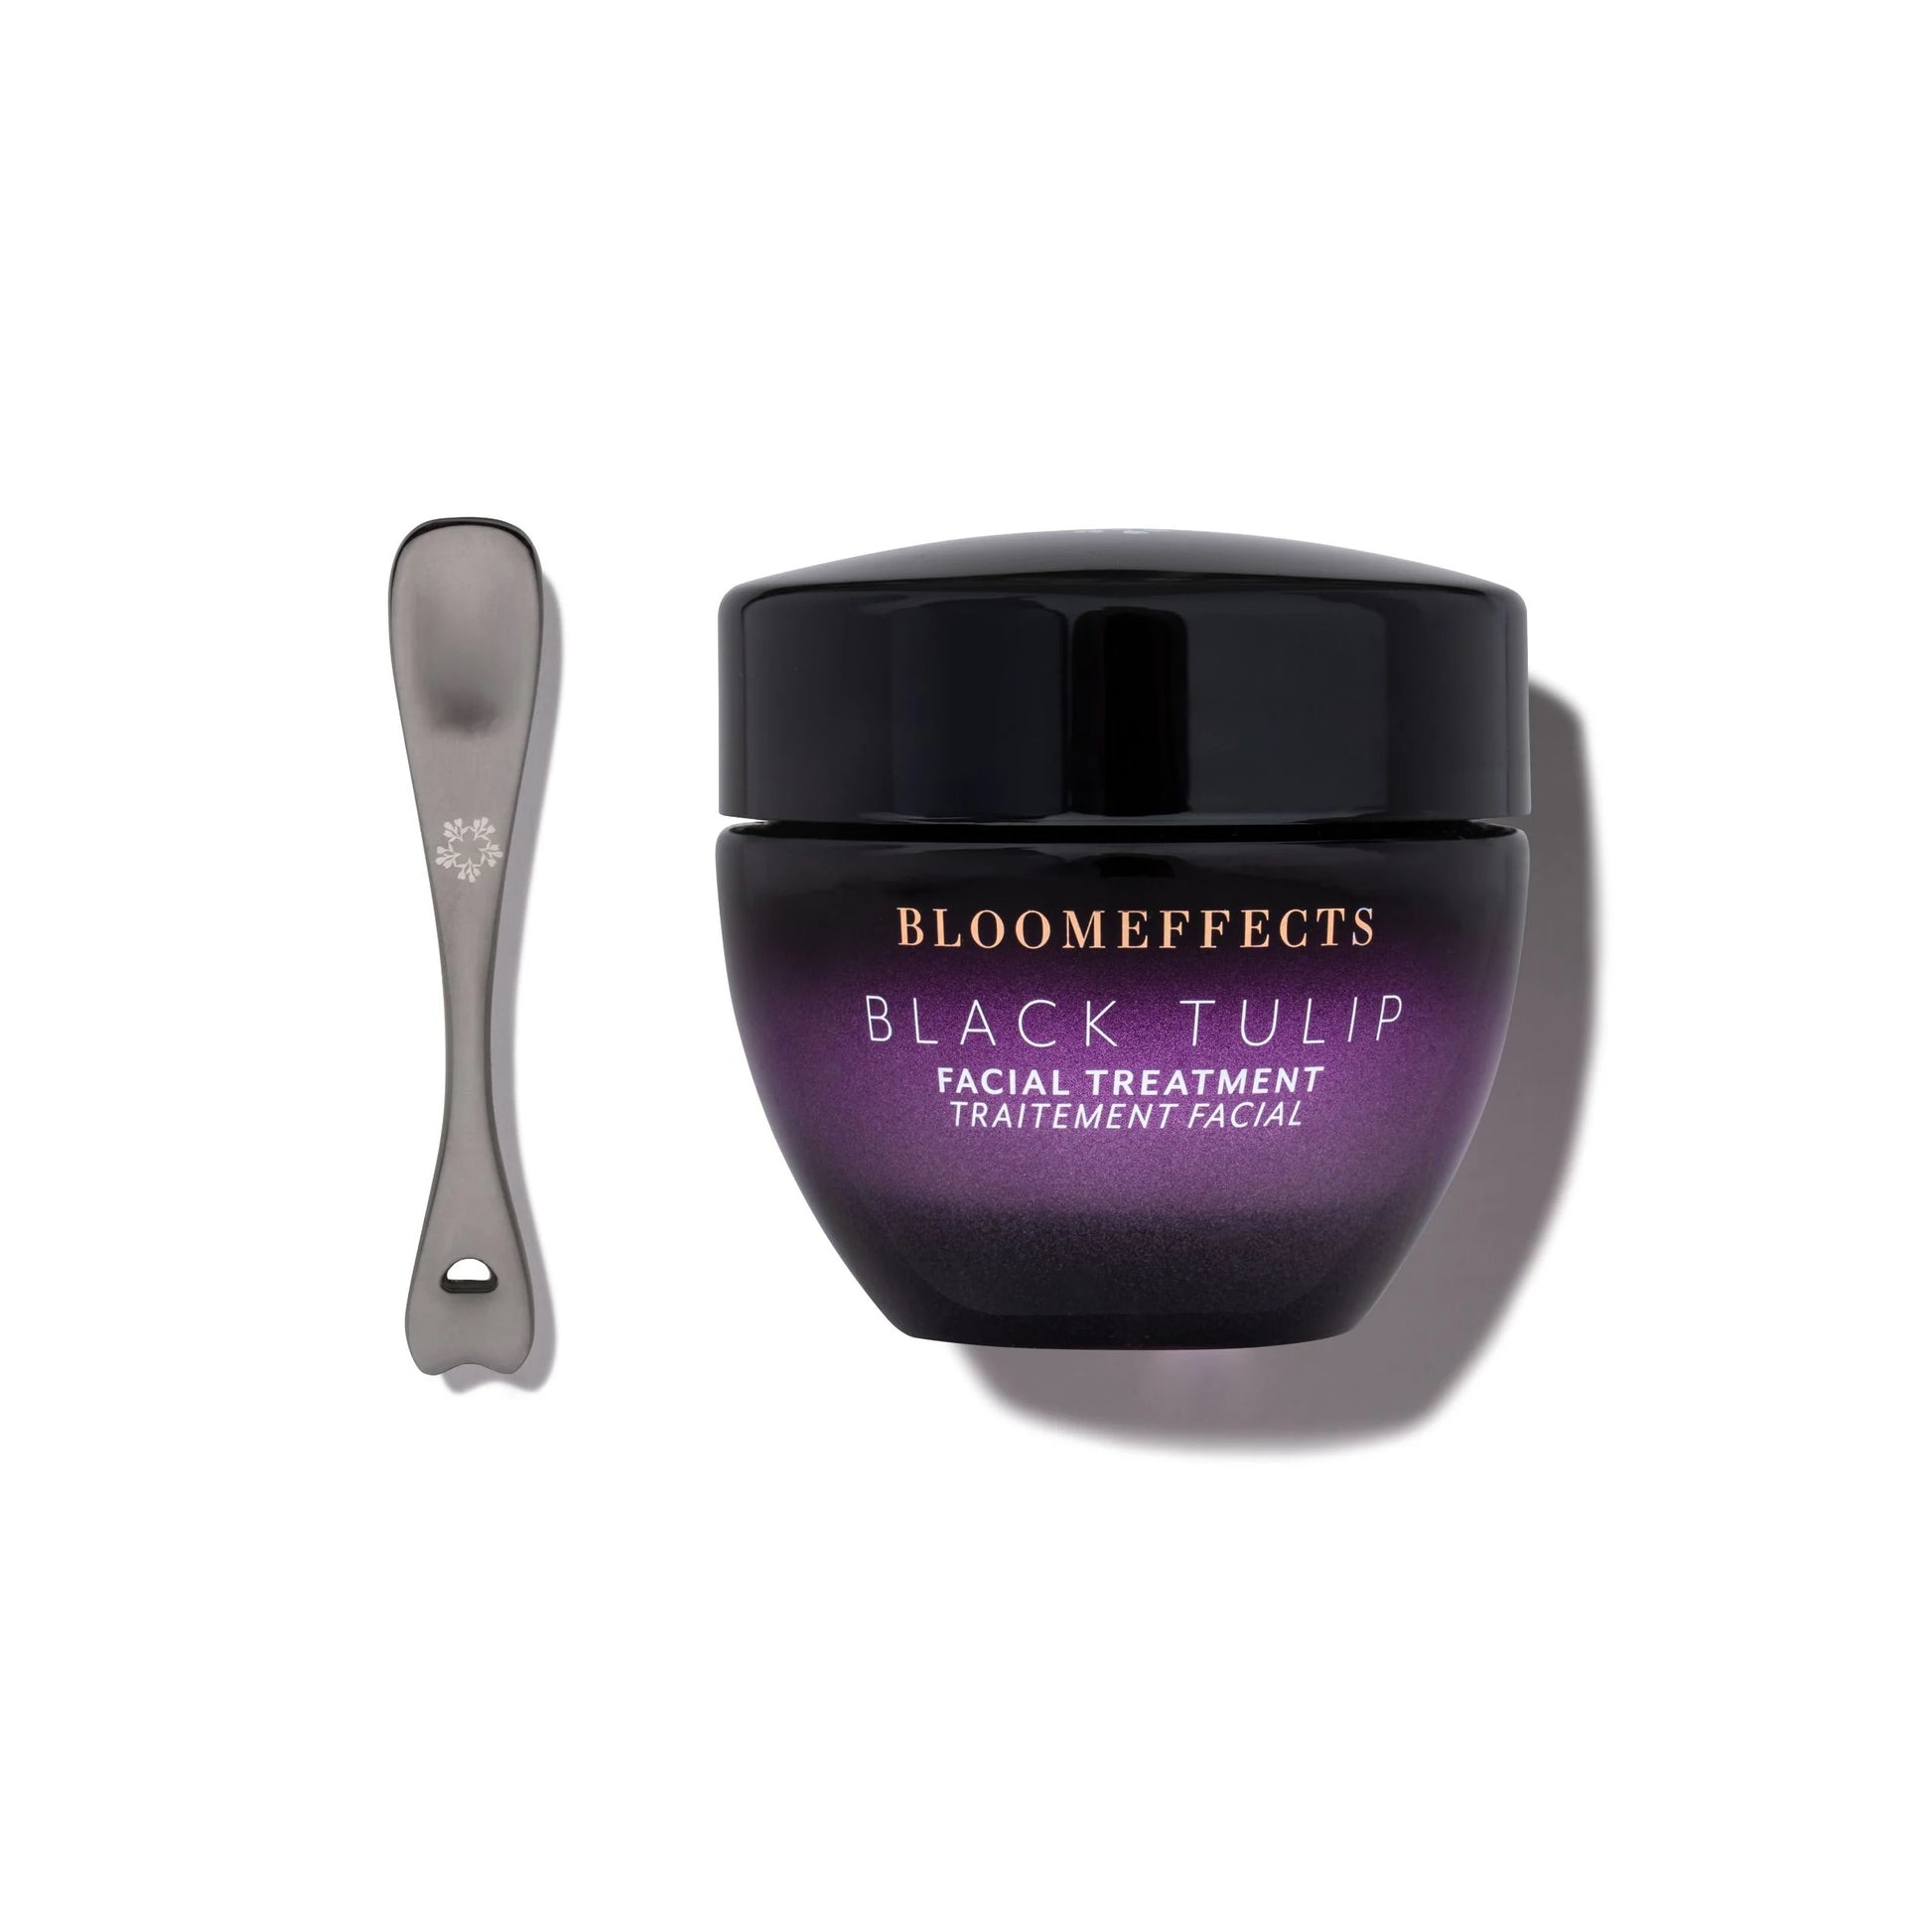 BLOOMEFFECTS Black Tulip Facial Moisturizer Mask